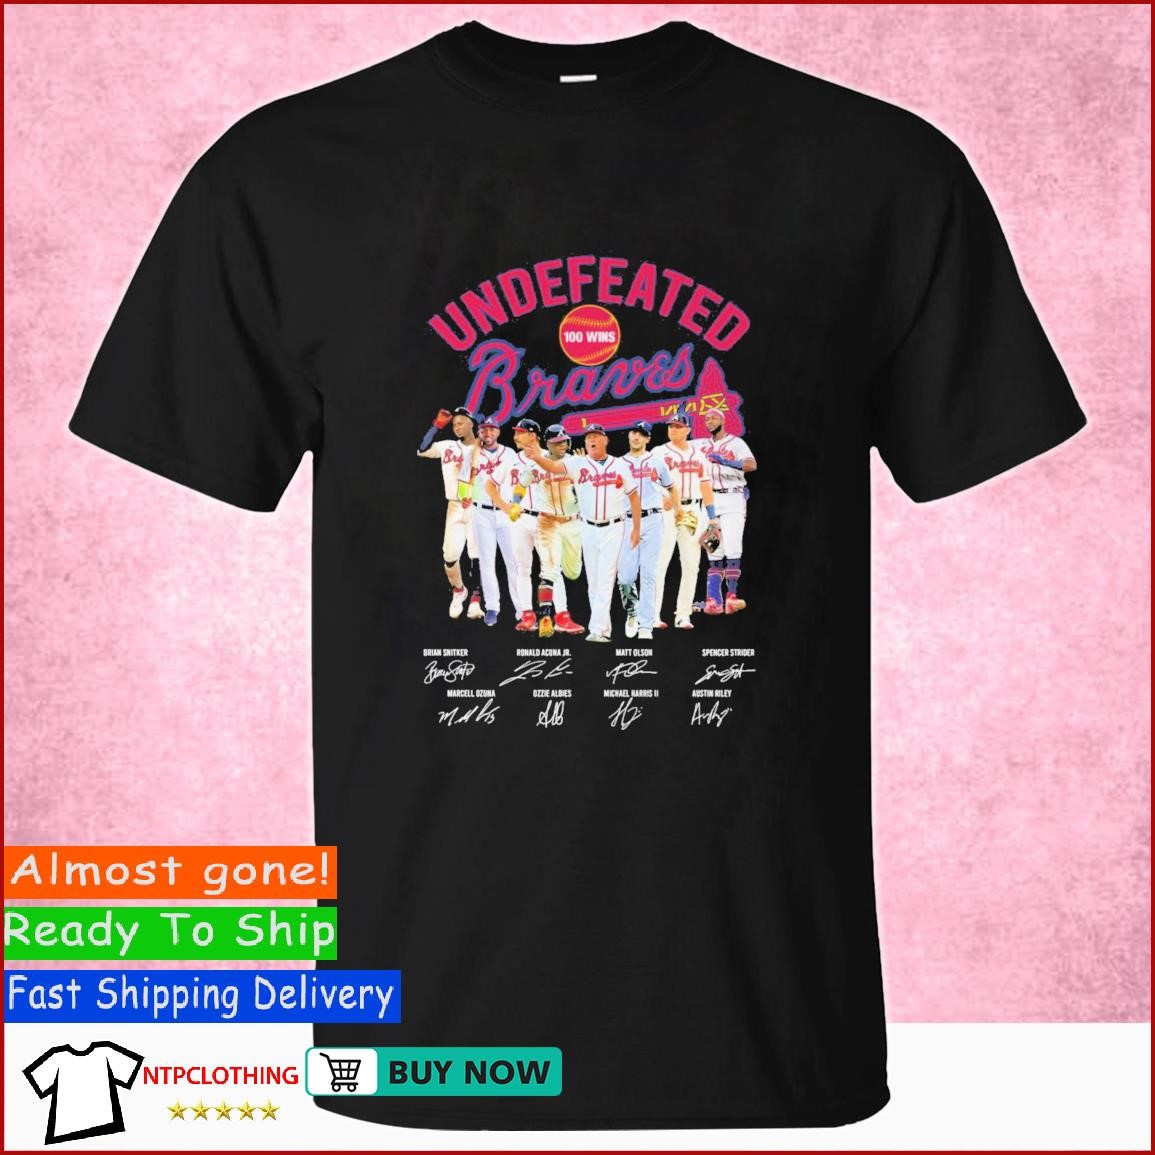 Top it's Over 13 October Atlanta Braves Shirt, hoodie, sweater, long sleeve  and tank top